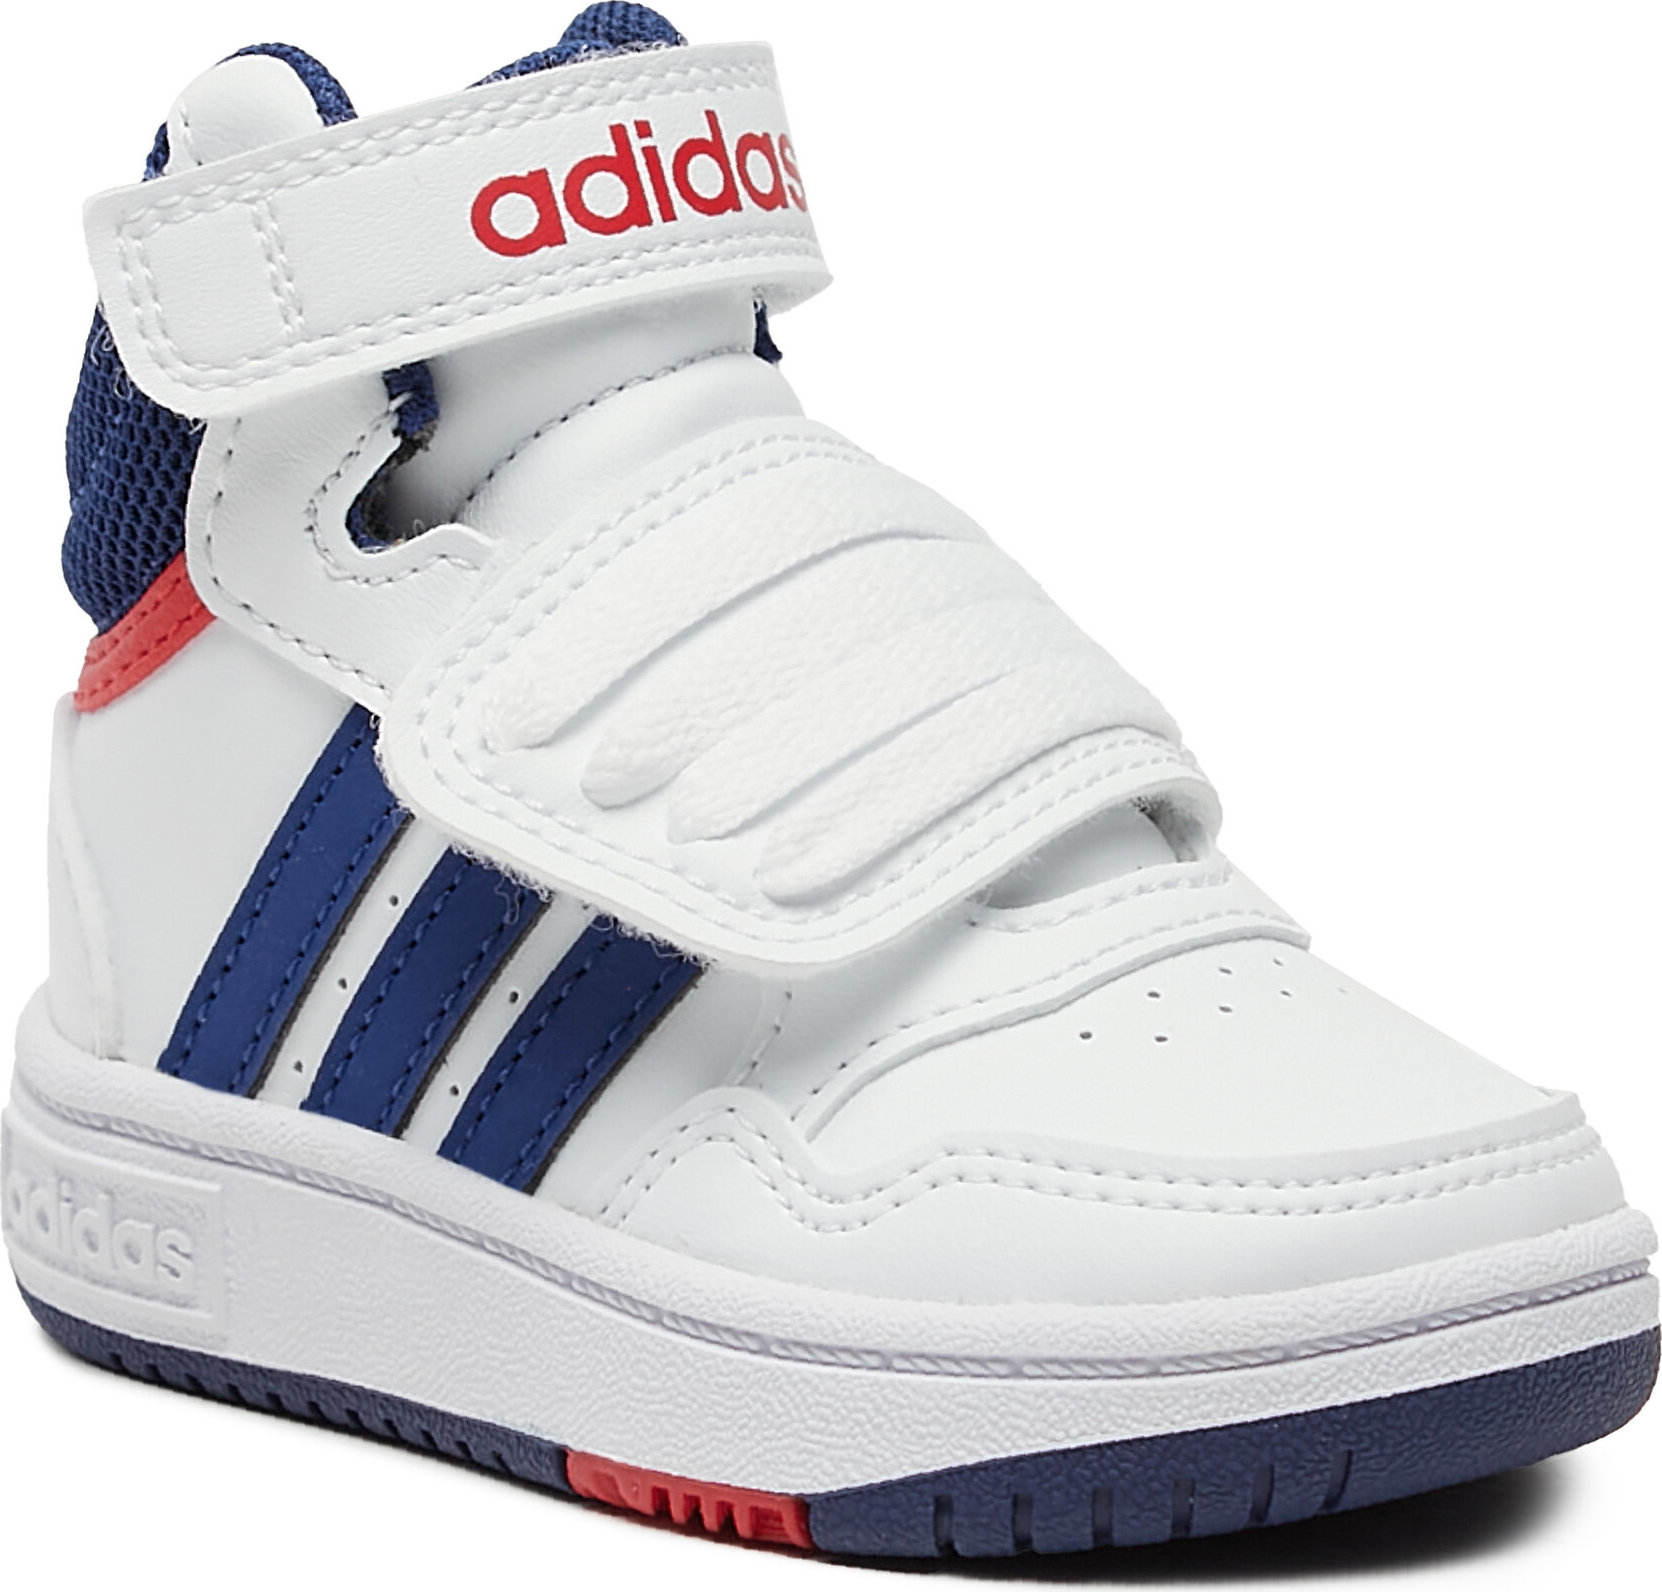 Boty adidas Hoops Mid GZ9650 White/Navy/Red